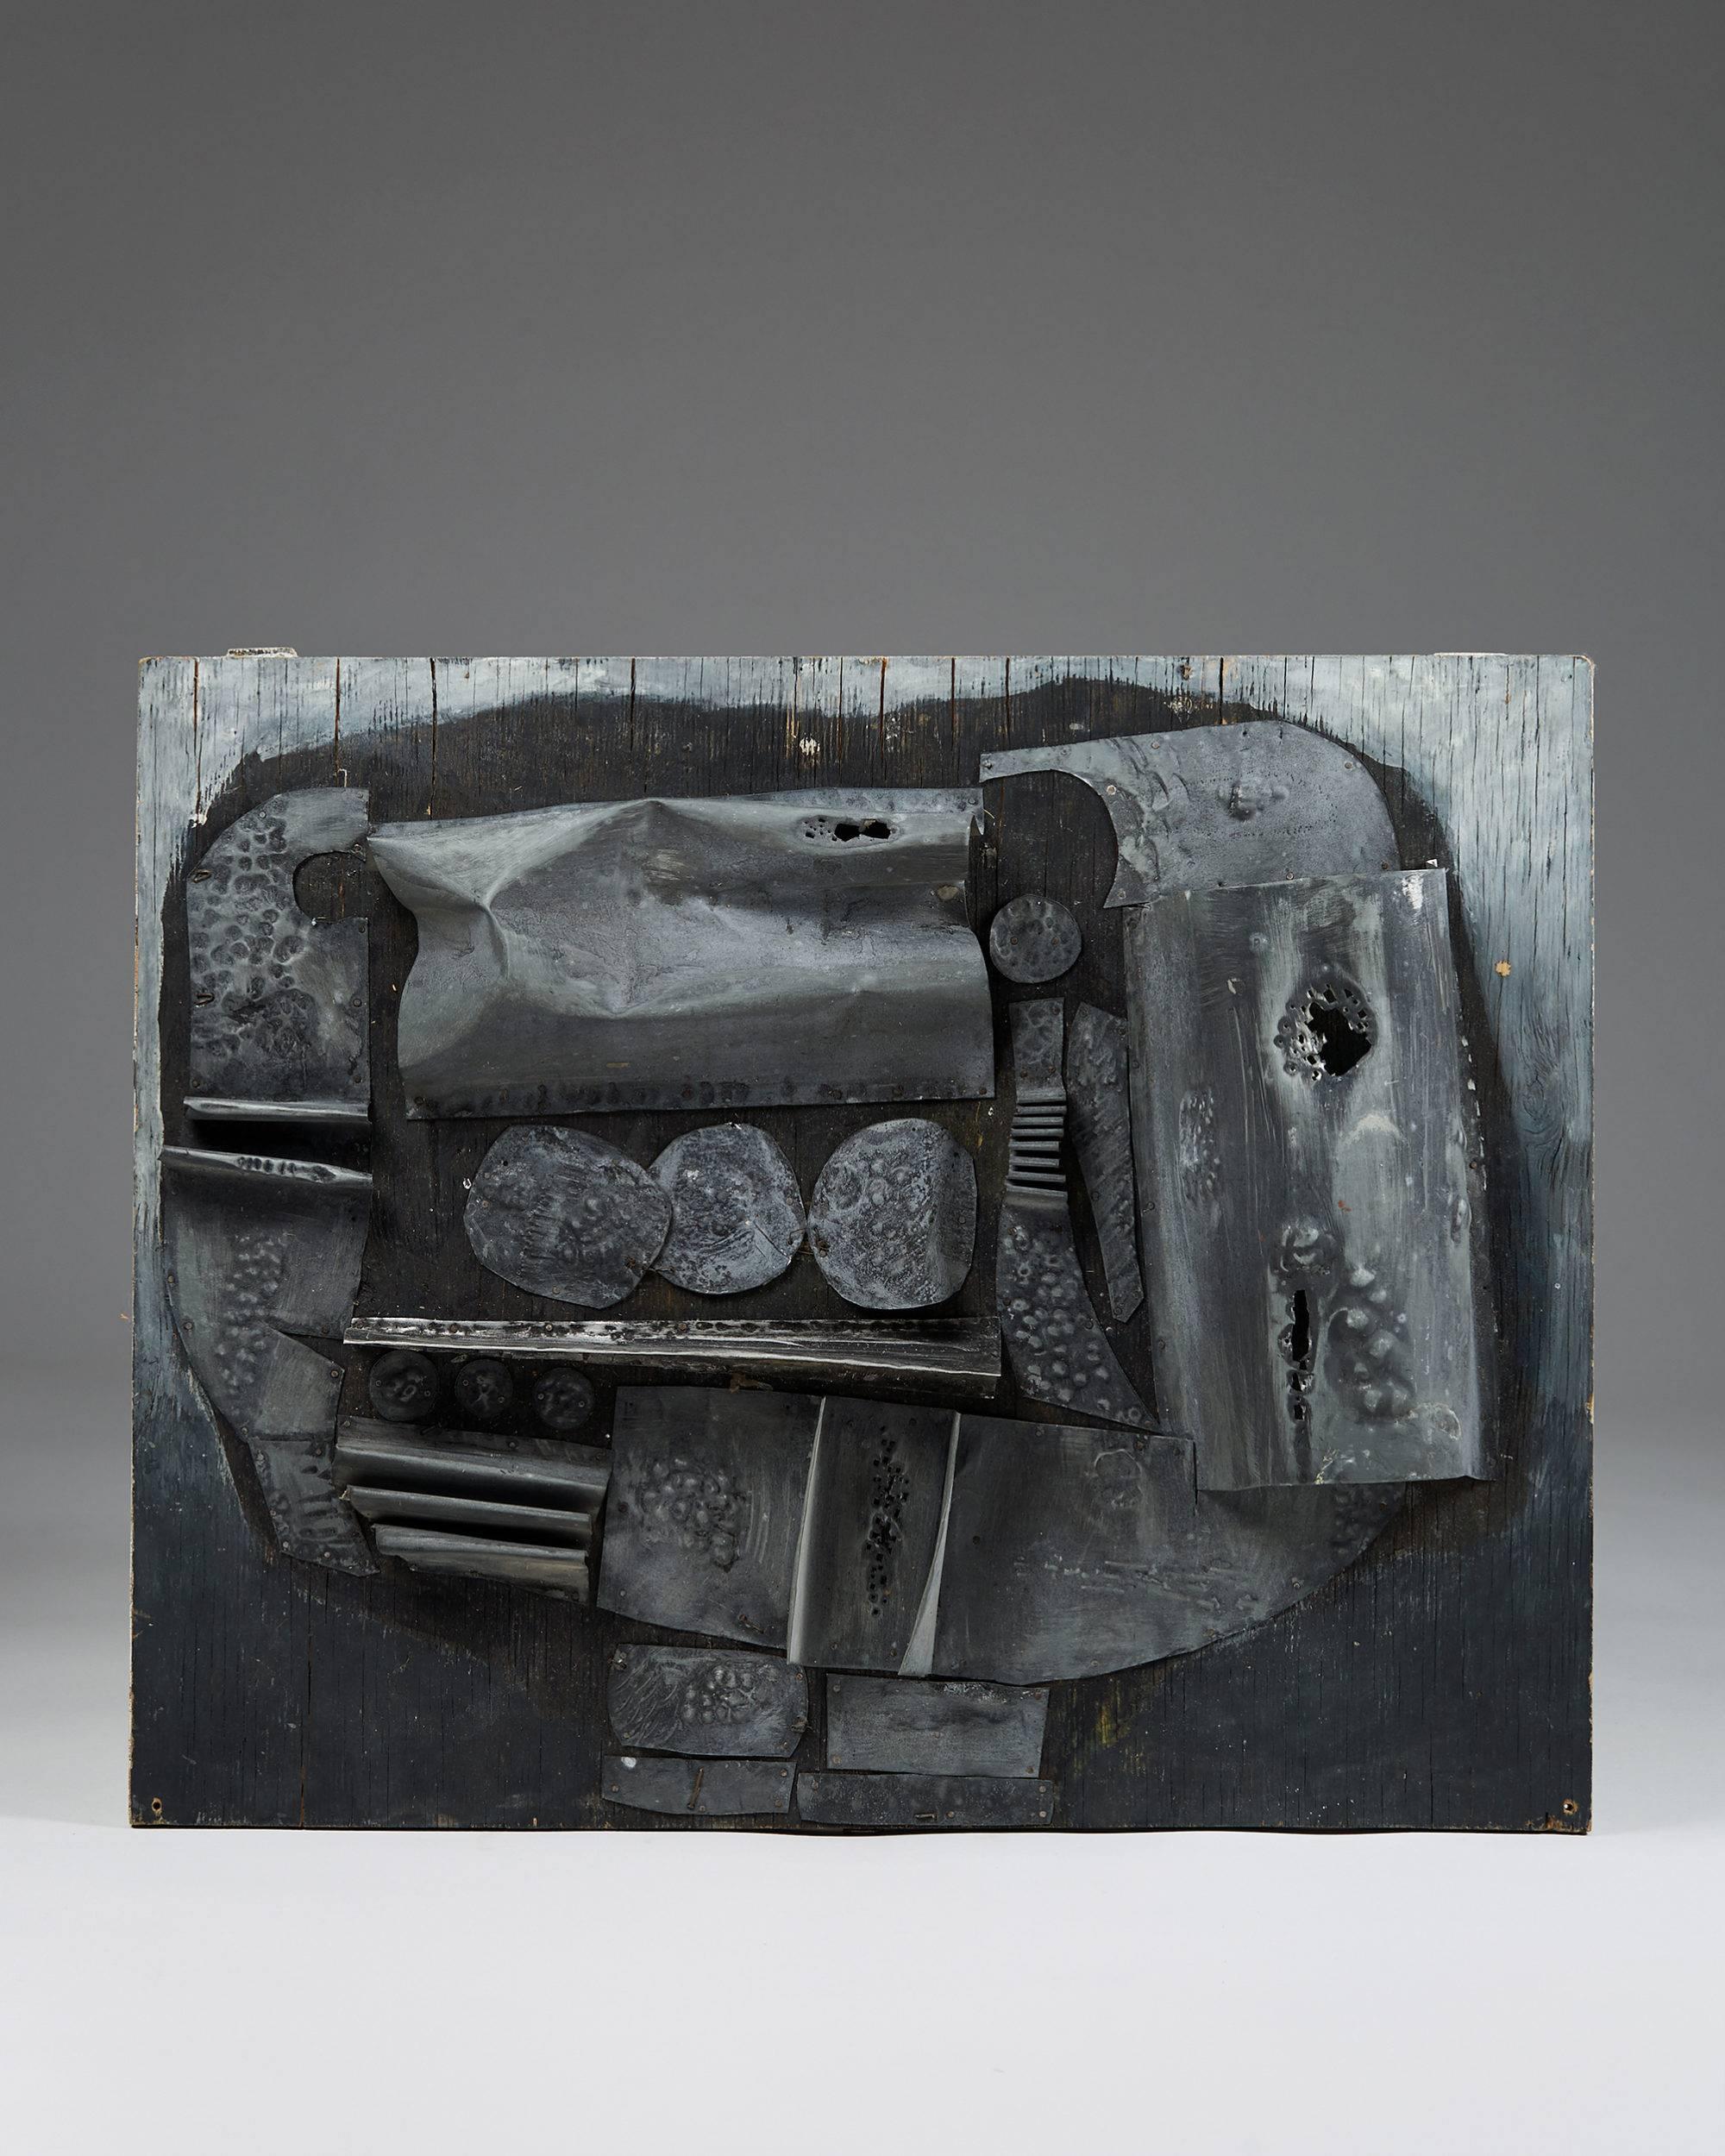 Relief by Zbigniew Stanley Kupczynski,
Poland. 1960's.

Mixed media.

Dimensions:
H: 67 cm/ 26 1/2''
L: 83 cm/ 32 1/2''

Zbigniew Kupczynski (born November 28, 1928) is a Polish-Canadian abstract expressionist artist known for his colorful portrait